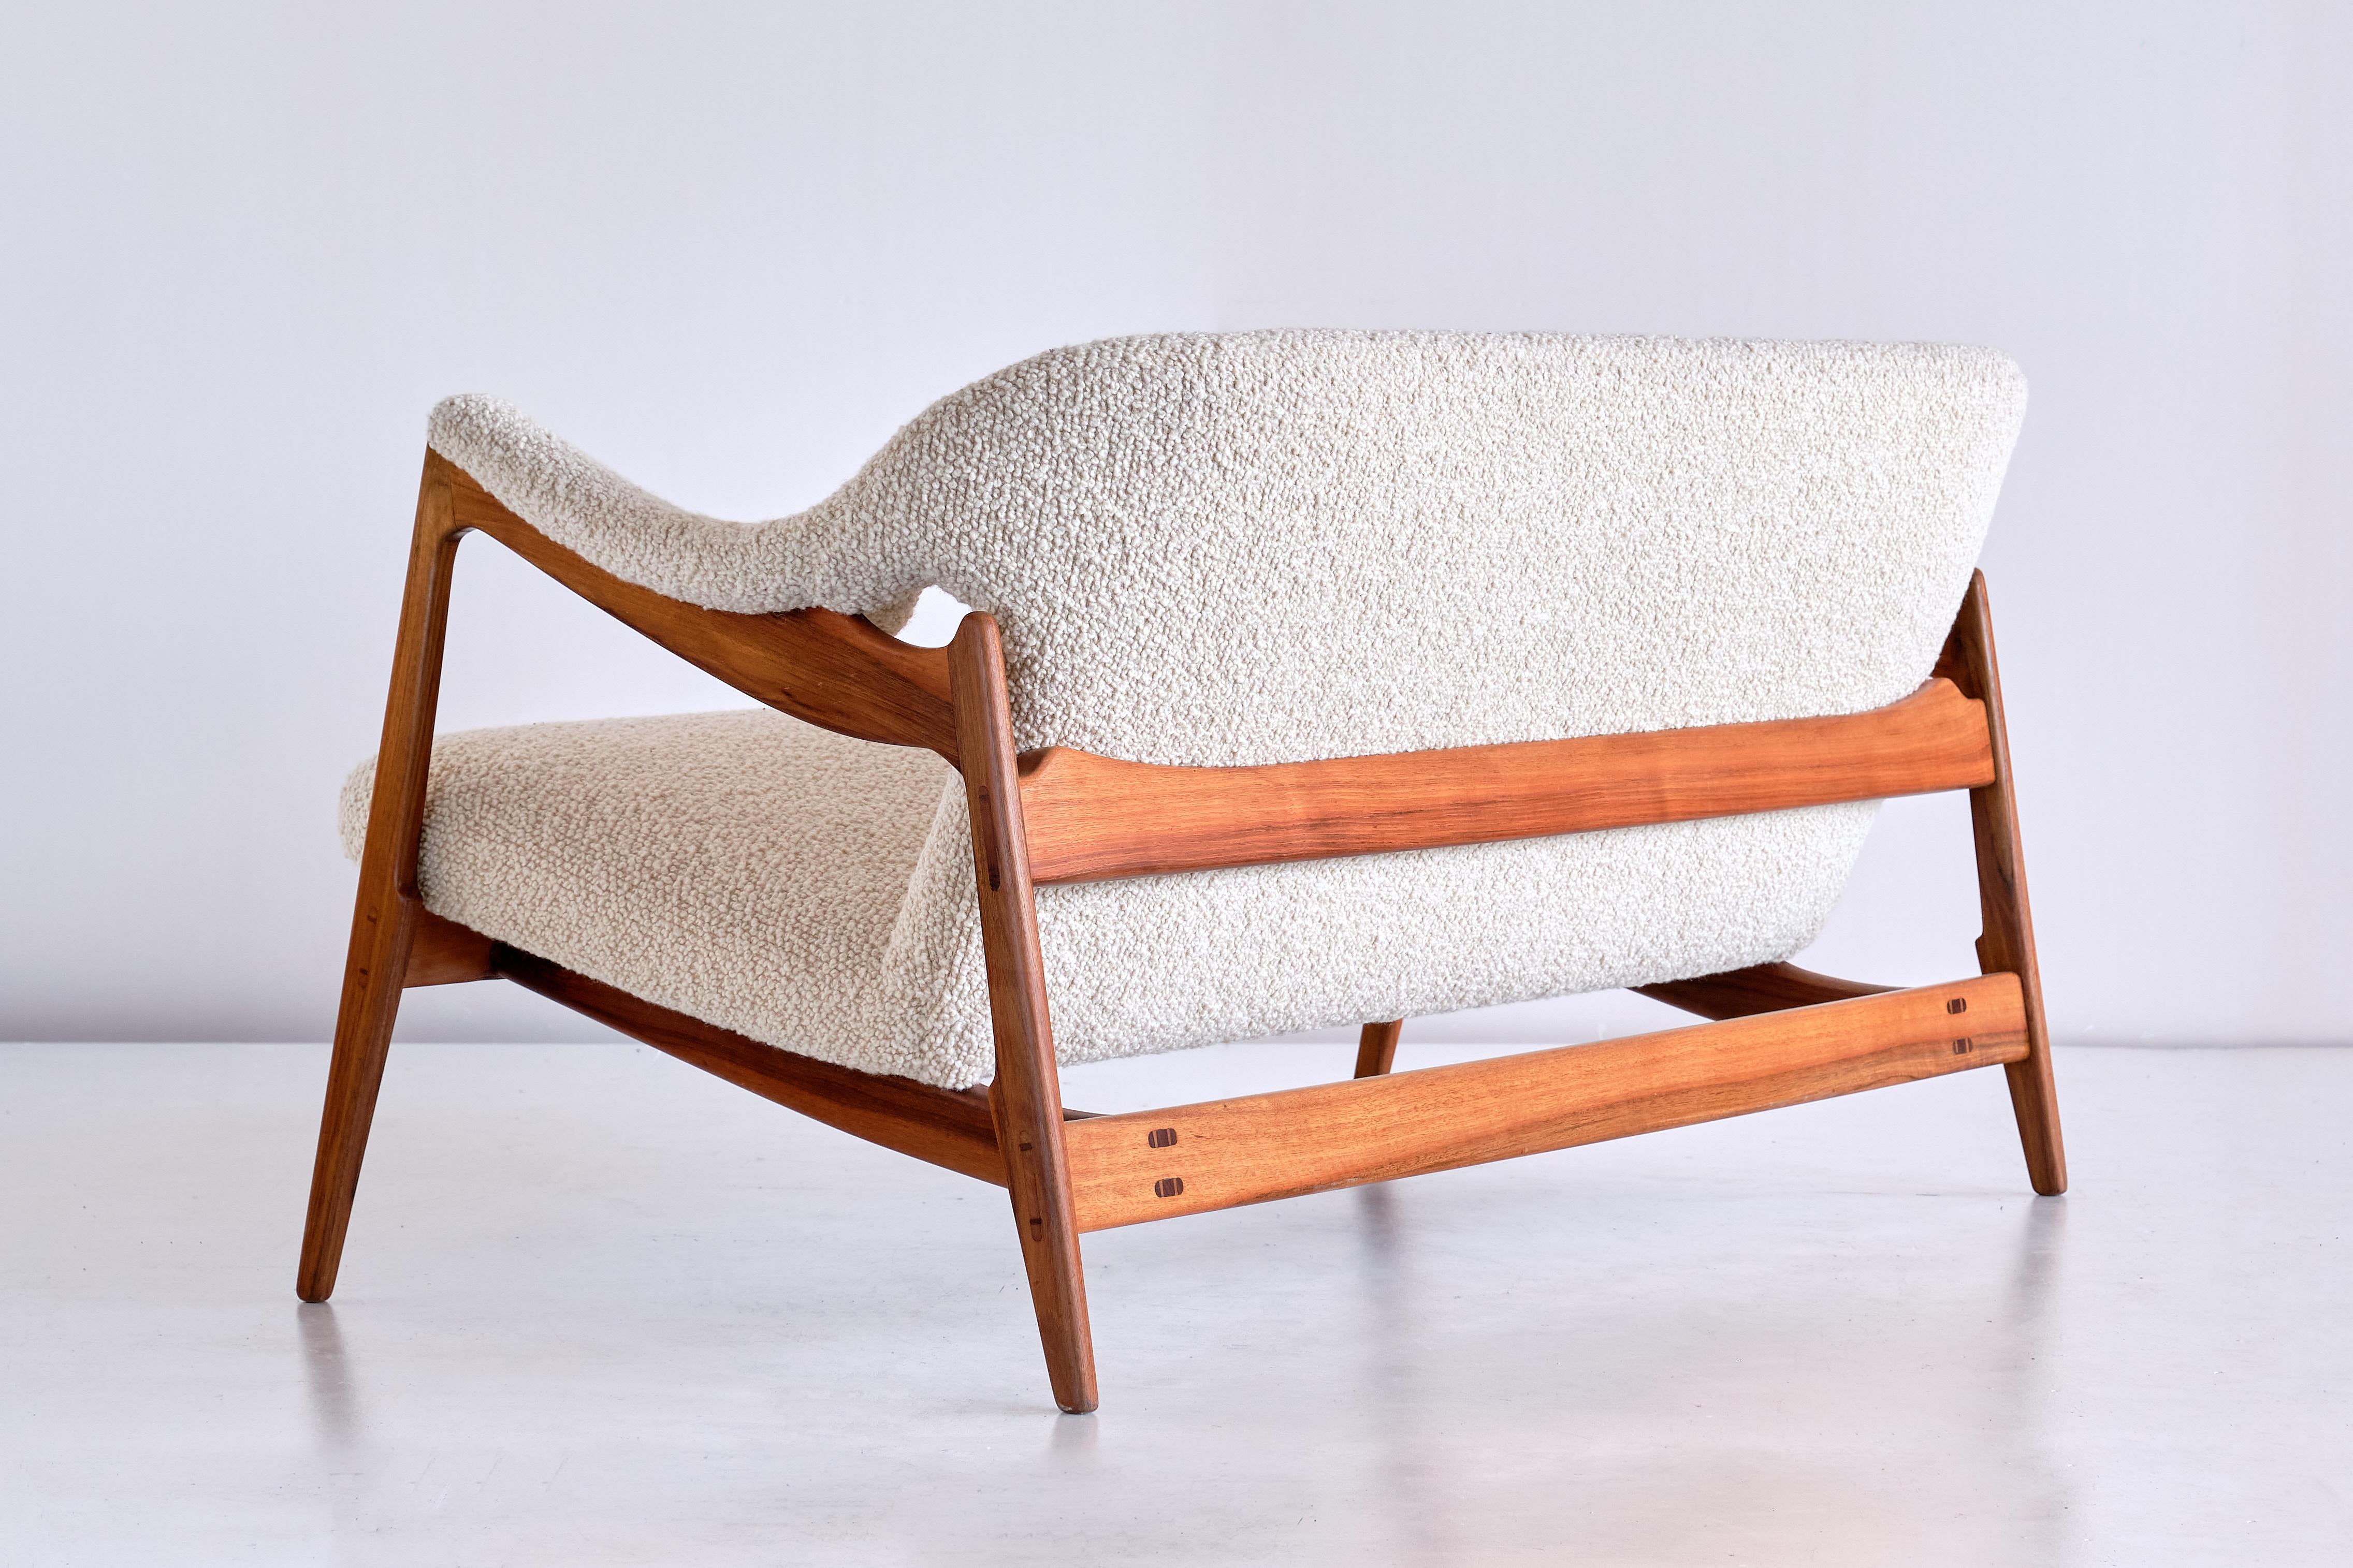 Important Brockmann Petersen Sofa in Nutwood and Bouclé, Louis G. Thiersen, 1951 For Sale 1